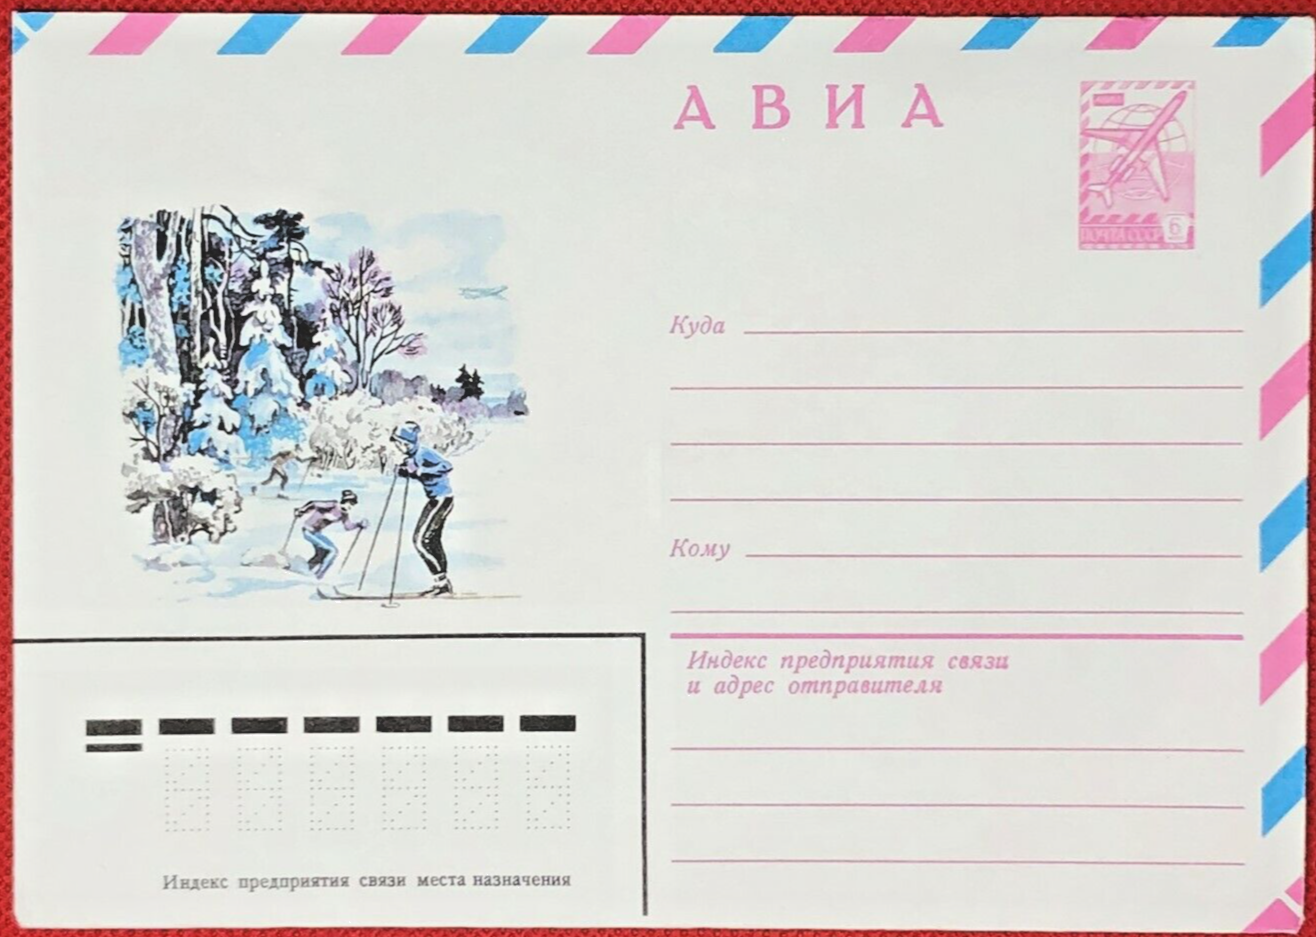 Primary image for Russia Air Postal Stationery mint 10.11.80 Cross Country Skiing ZAYIX 120521SM15